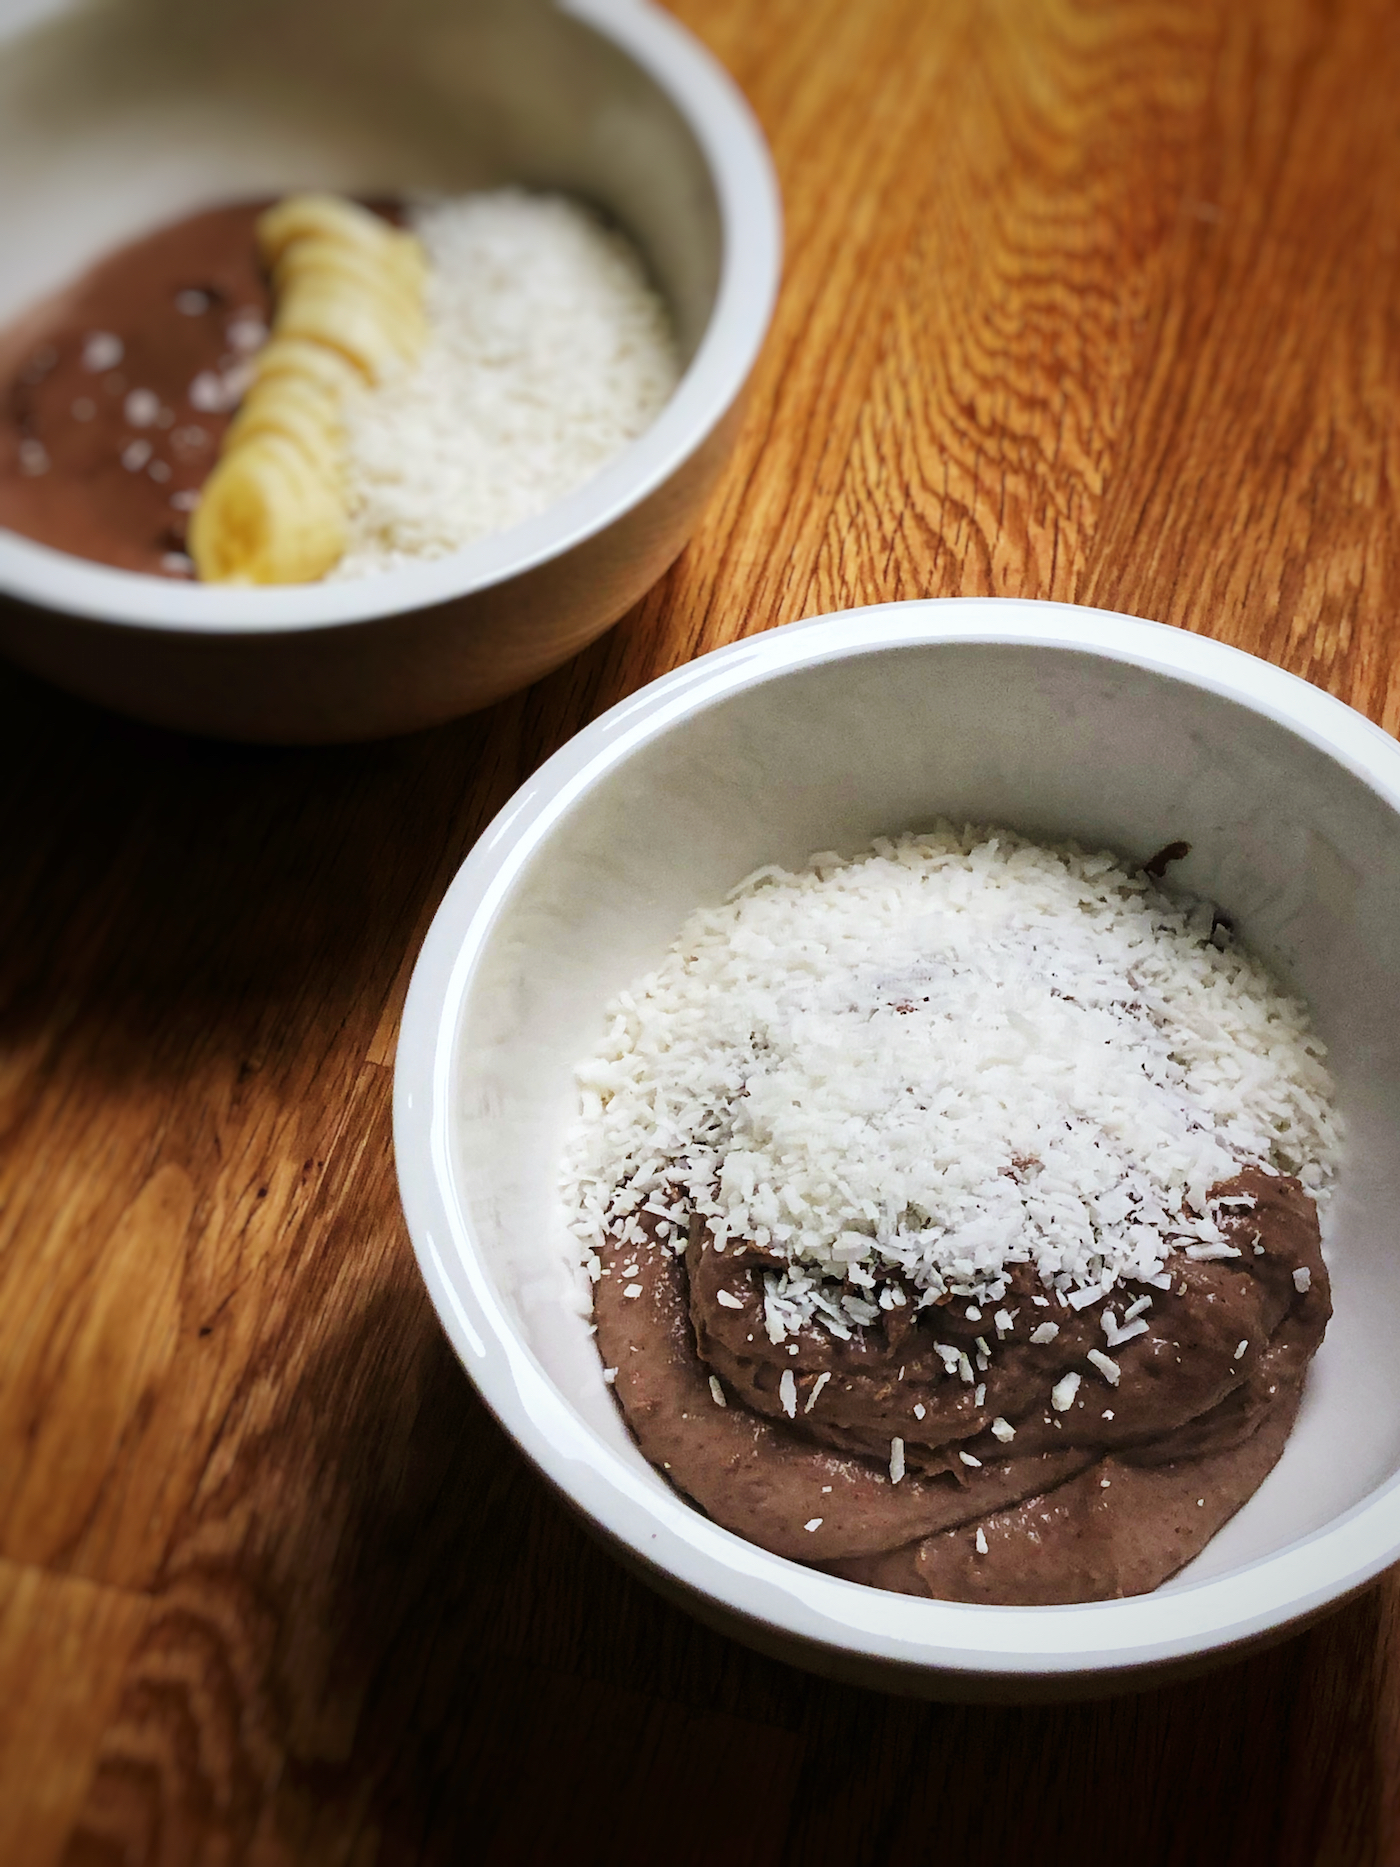 Chocolate and peanut butter casein pudding